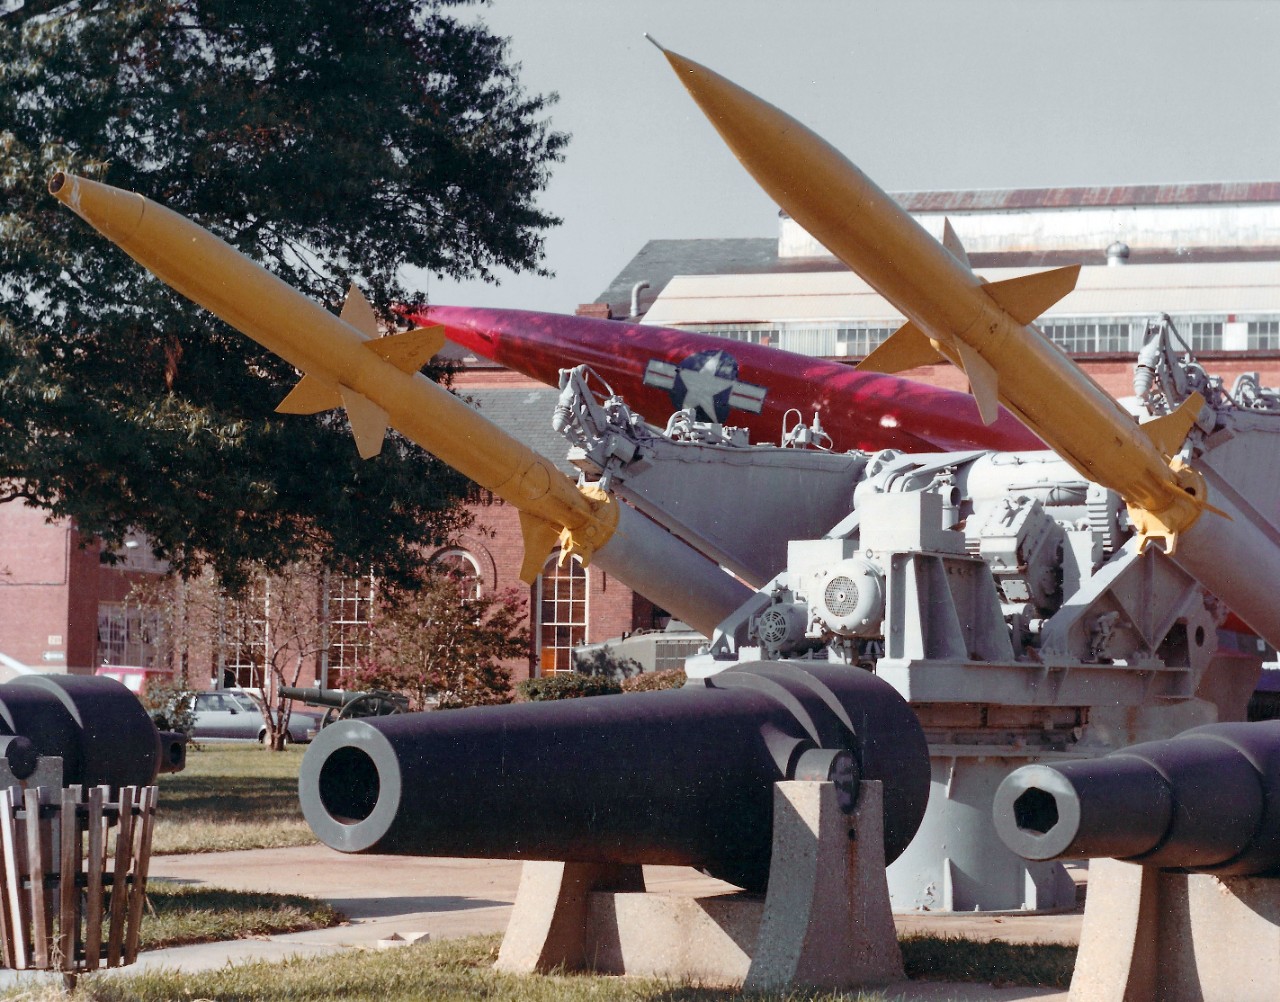 NMUSN-151:  Willard Park, Washington Navy Yard, Washington, D.C. late 1970s.    View looking north.     Terrier Missile (Surface to Air Missiles and Launcher); and Regulus II missile beyond the smooth-bore guns.    National Museum of the U.S. Navy Photograph Collection.  